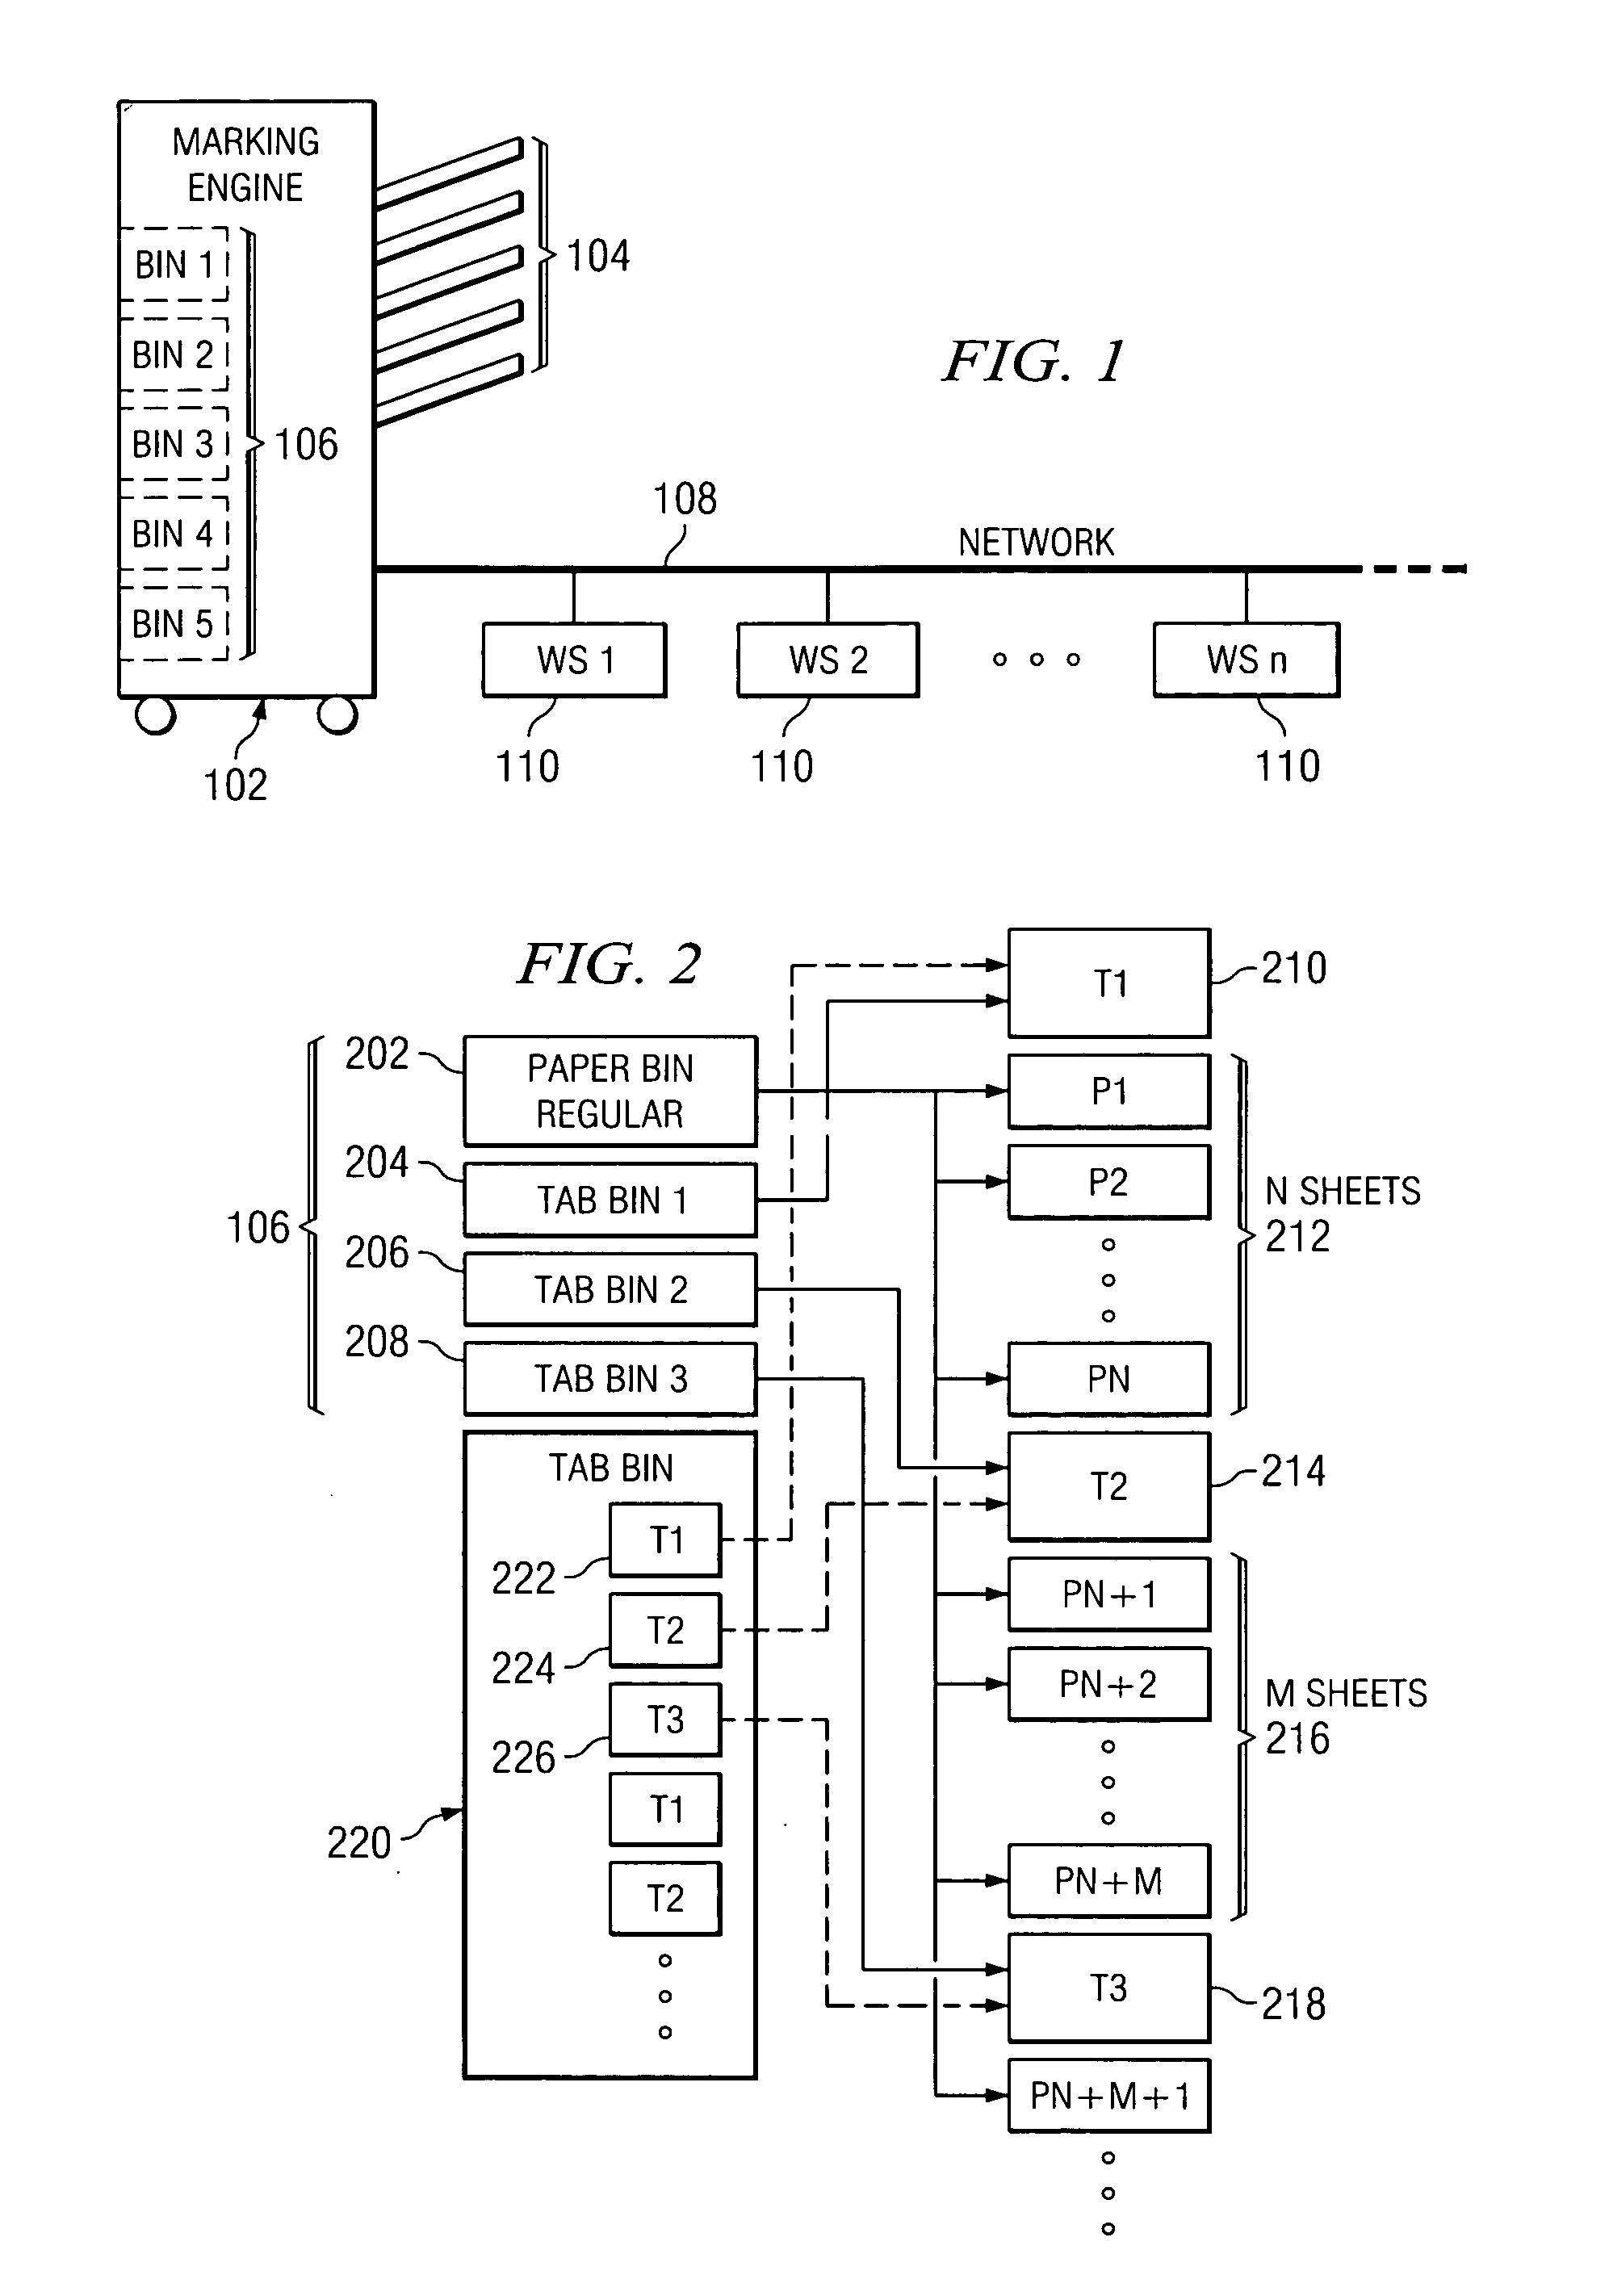 Method and apparatus for inserting tabs in a print job